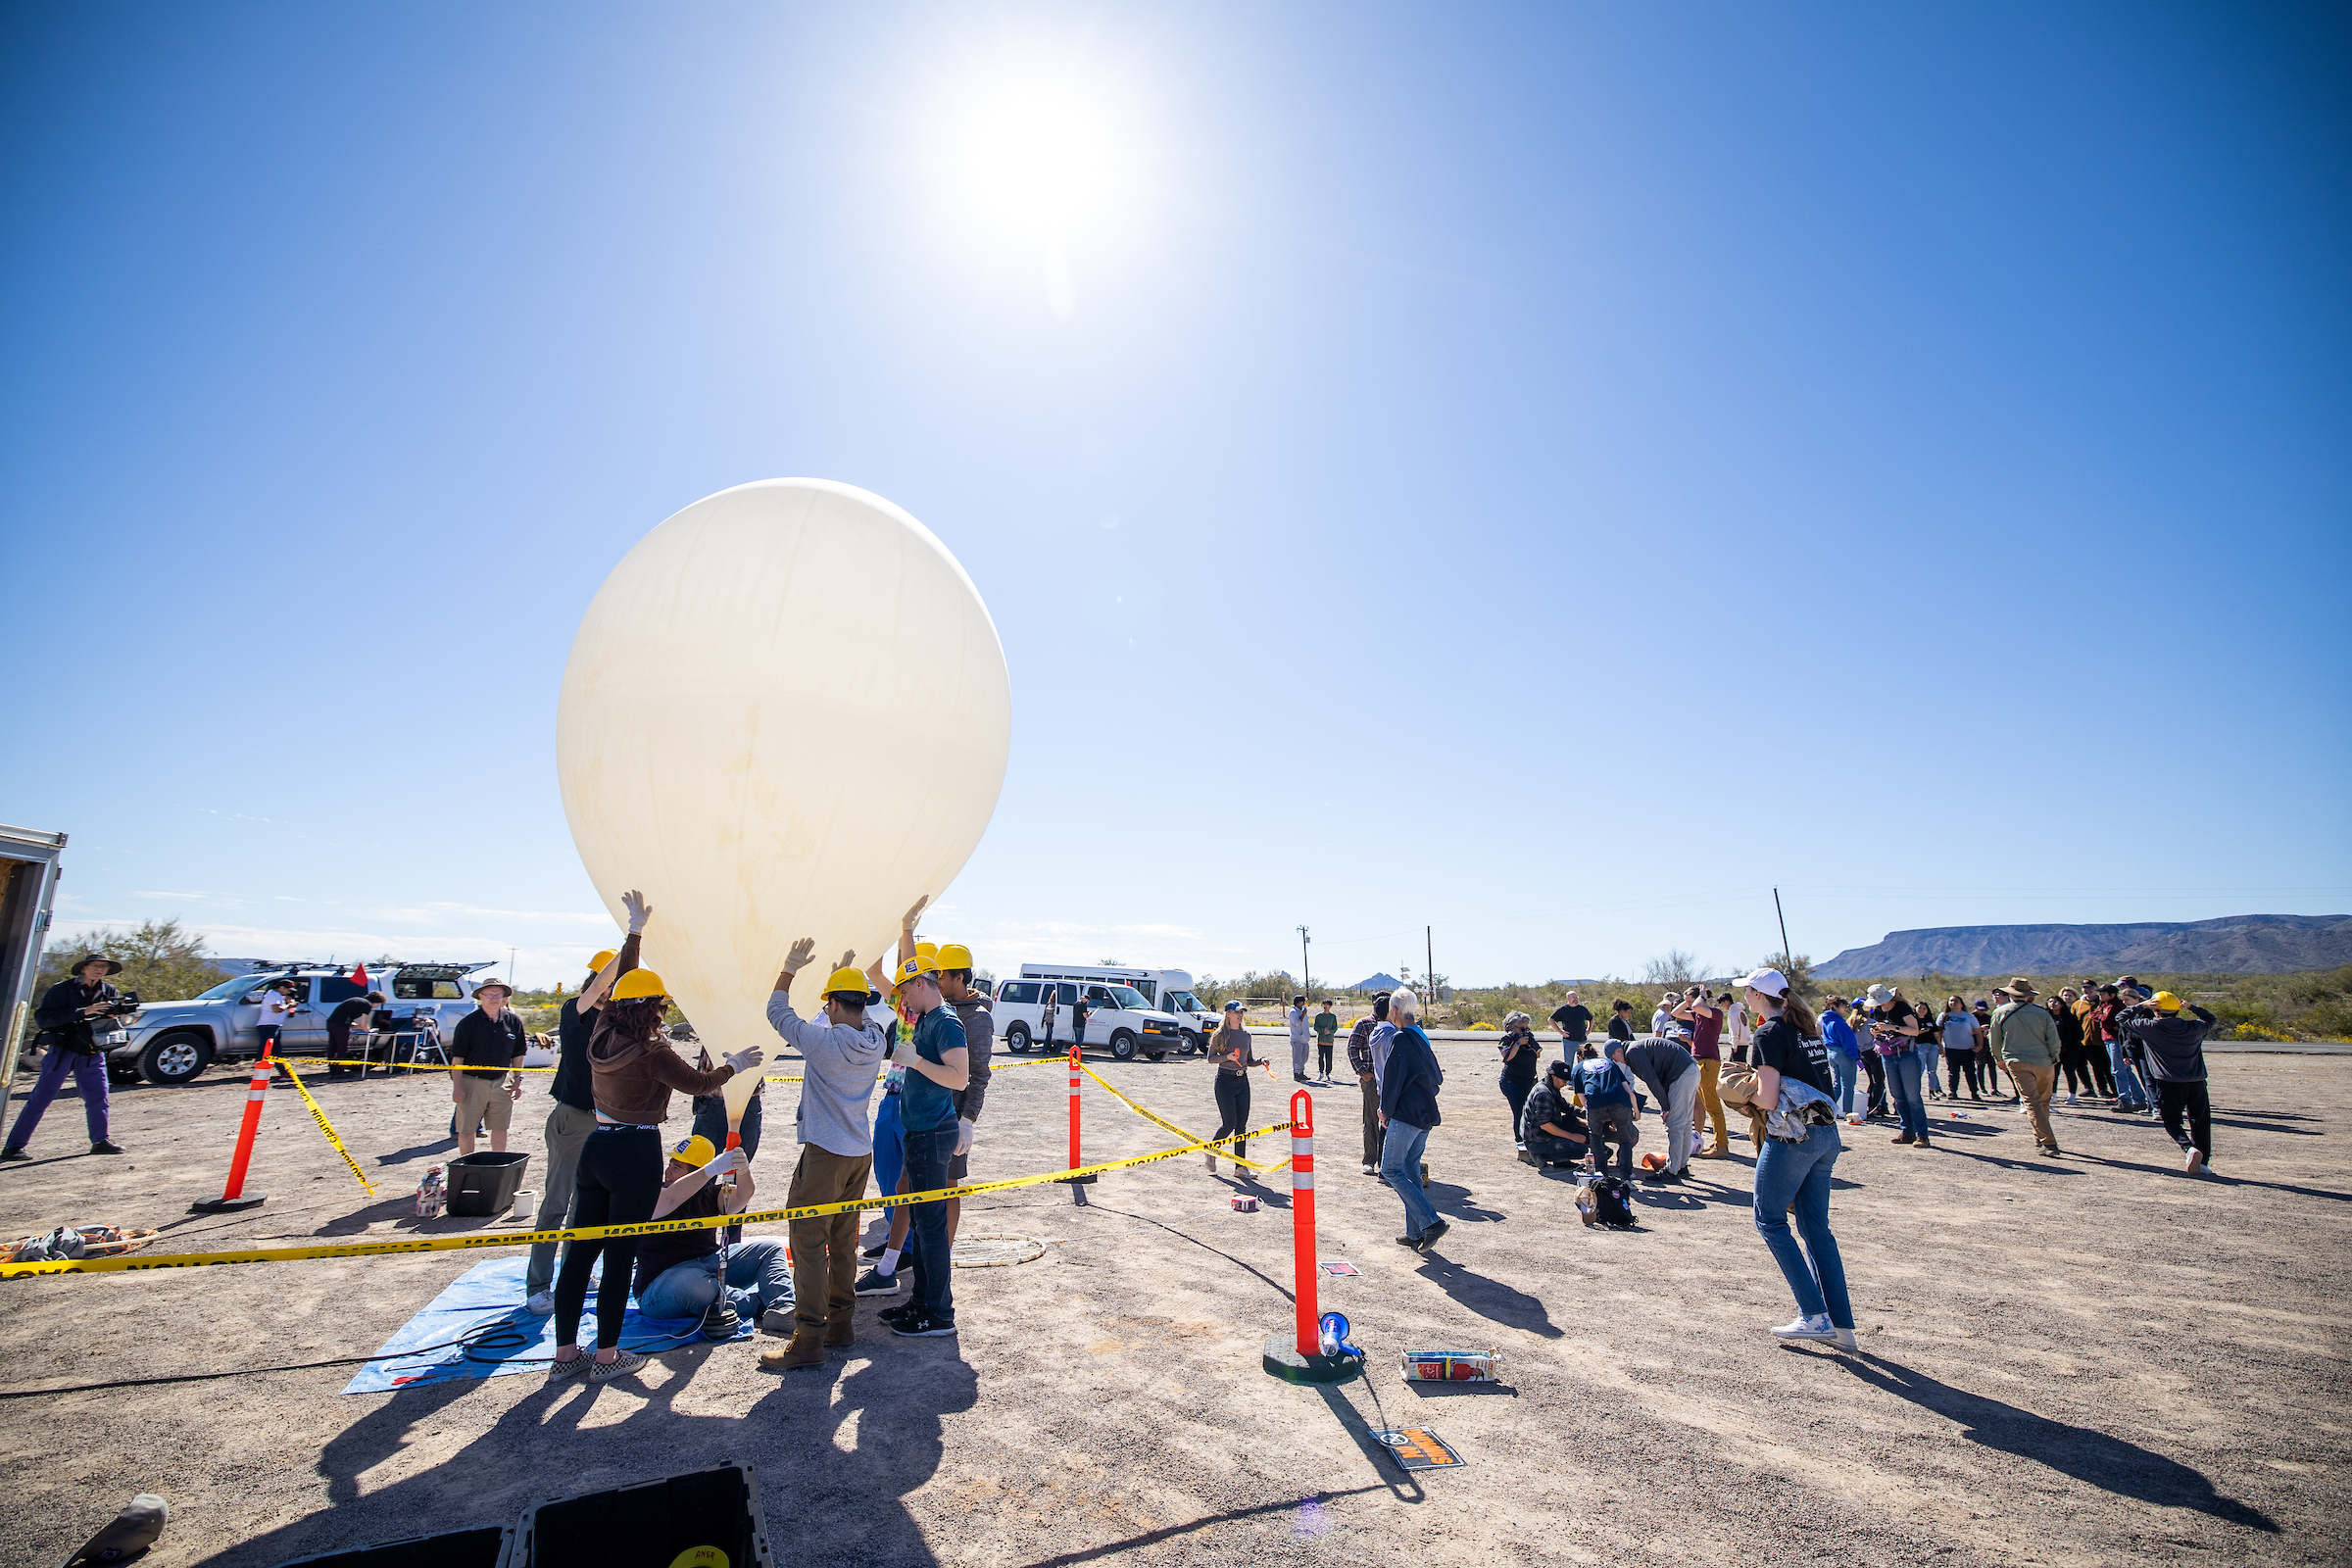 Students and volunteers prep weather balloon for a launch in the desert